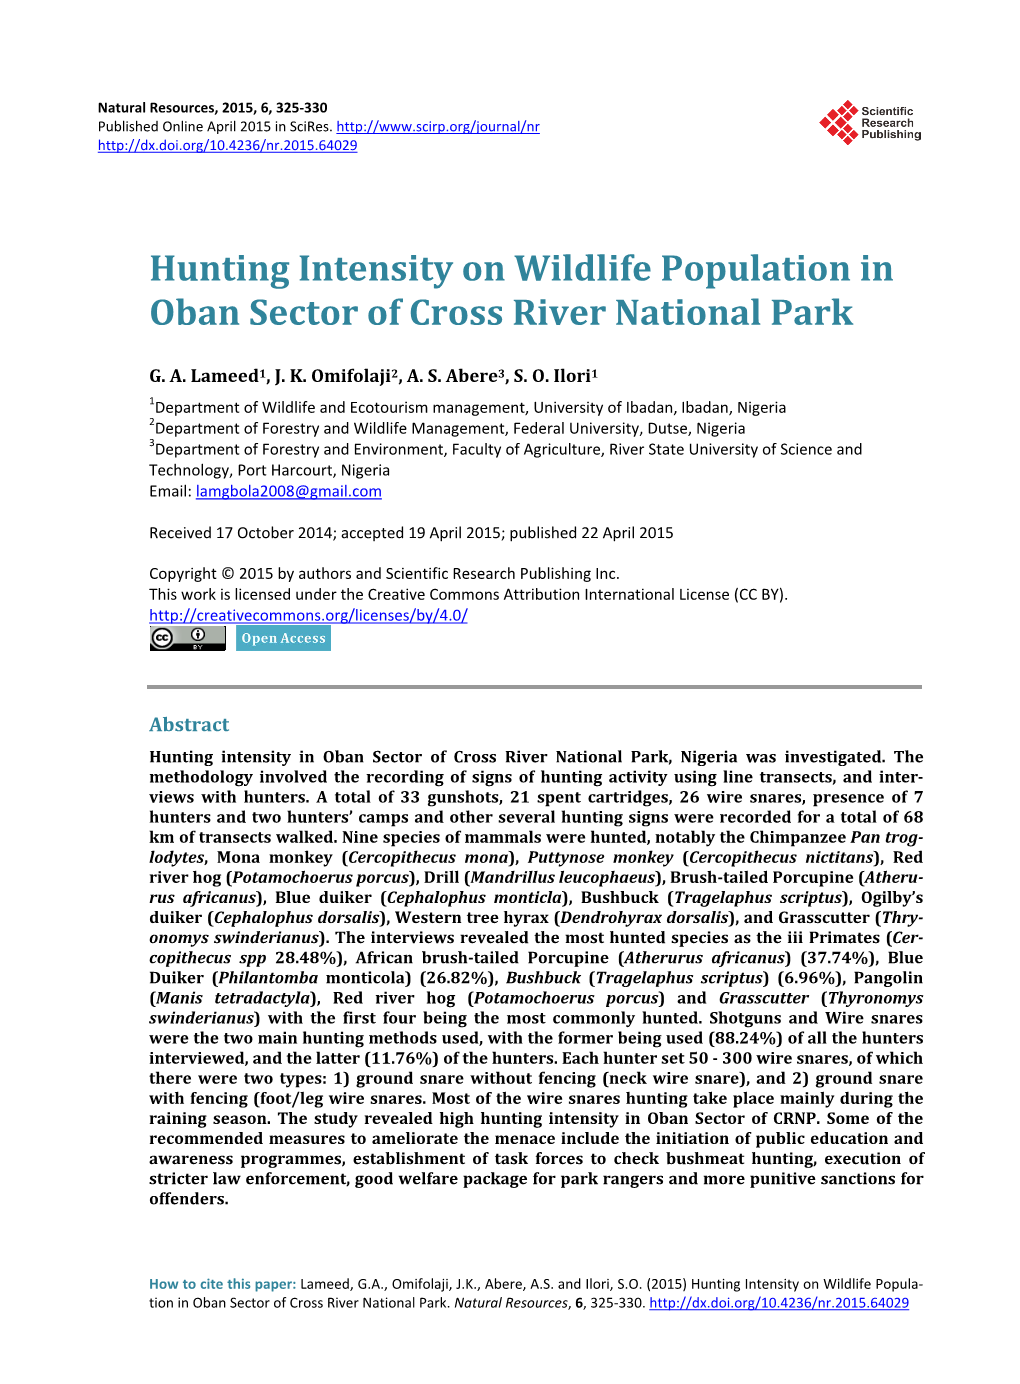 Hunting Intensity on Wildlife Population in Oban Sector of Cross River National Park